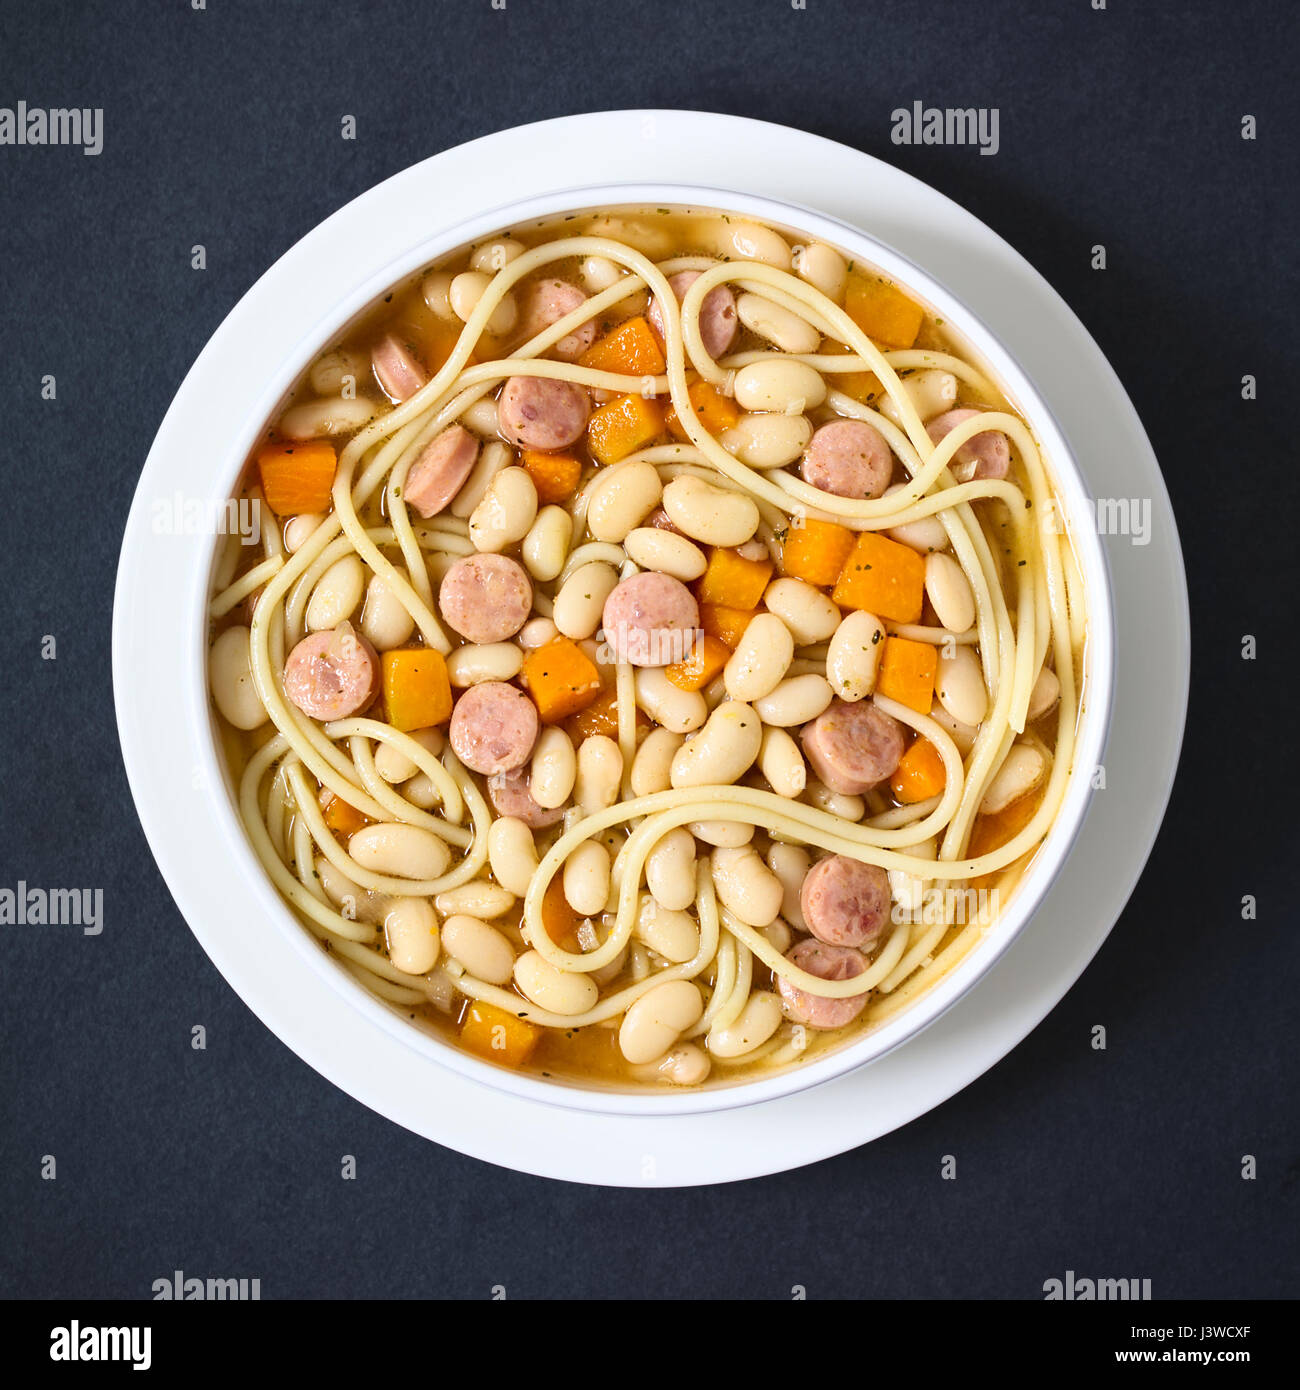 Chilean traditional Porotos con Riendas (beans with reins) dish of cooked dried beans with pumpkin, onion, spaghetti and sausage Stock Photo